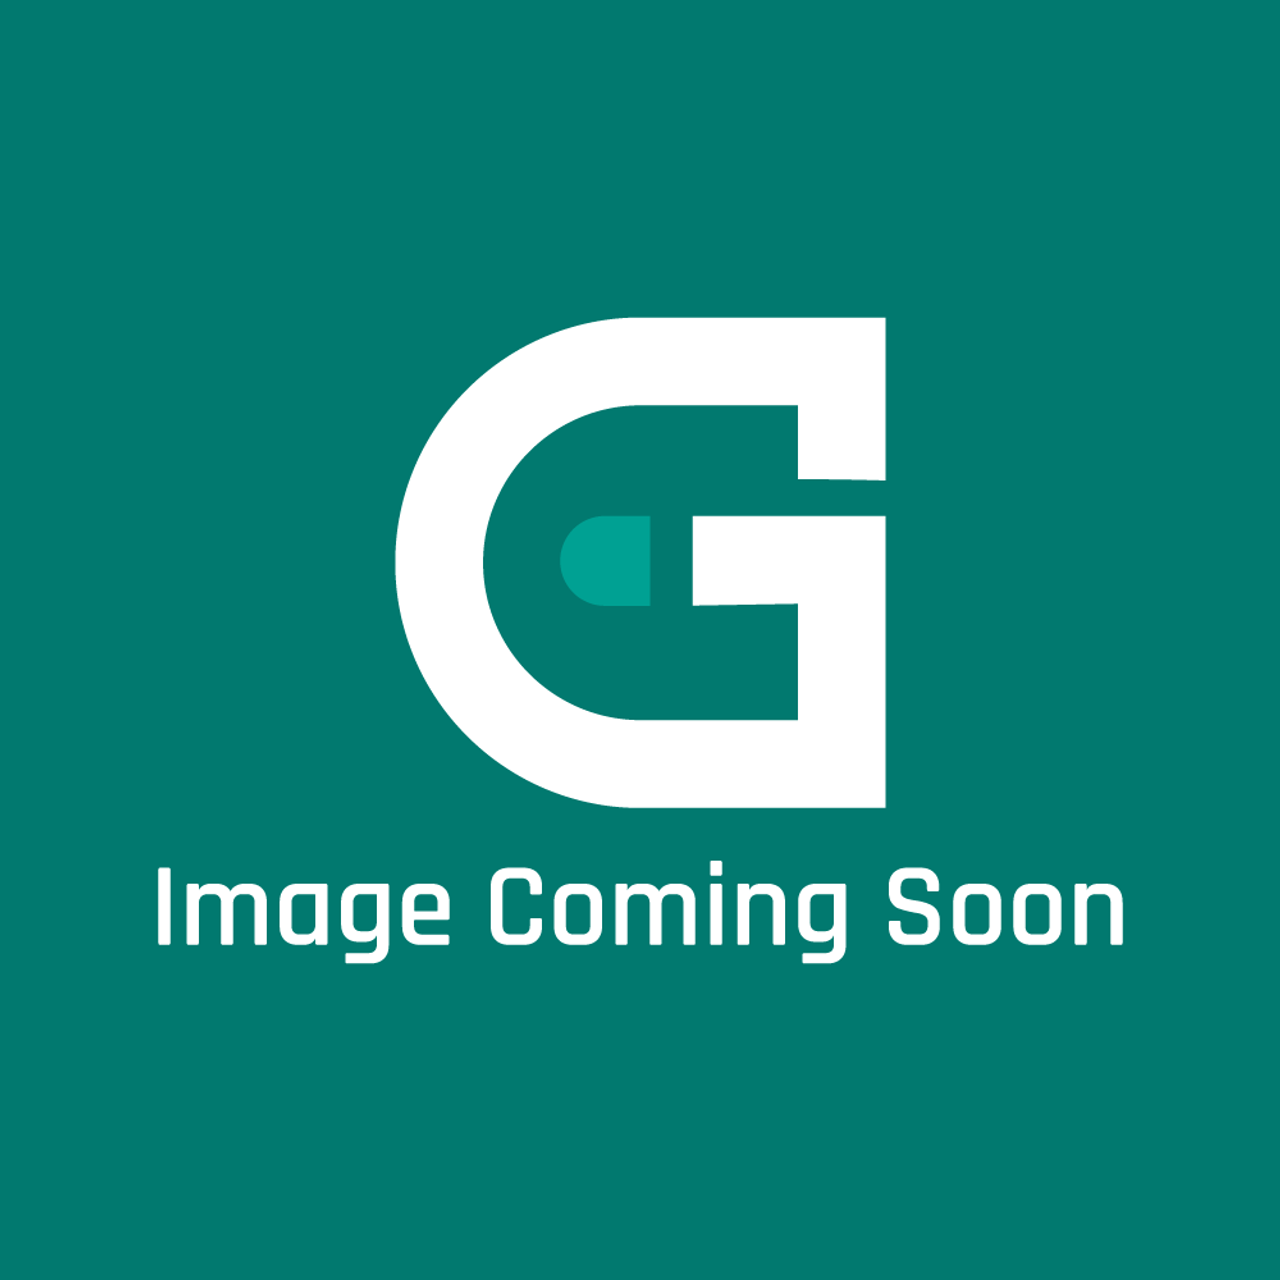 AGA Marvel M0242 - Cup Washer - M5 Scw Zp Blk - Image Coming Soon!